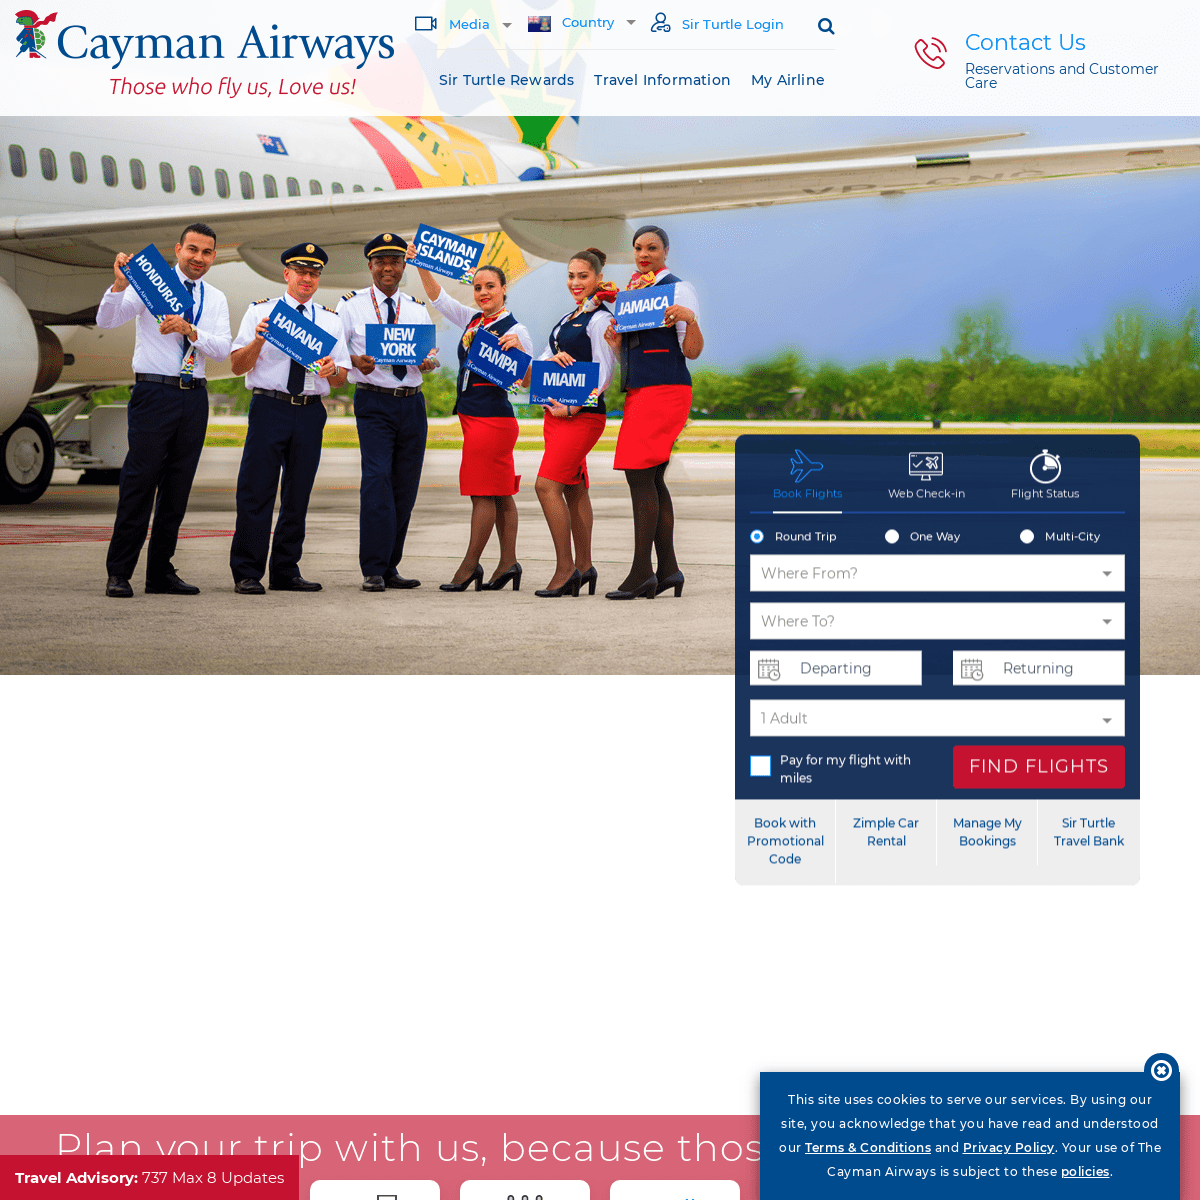 Cayman Airways - Airline Tickets, Web Check-in and Travel Deal